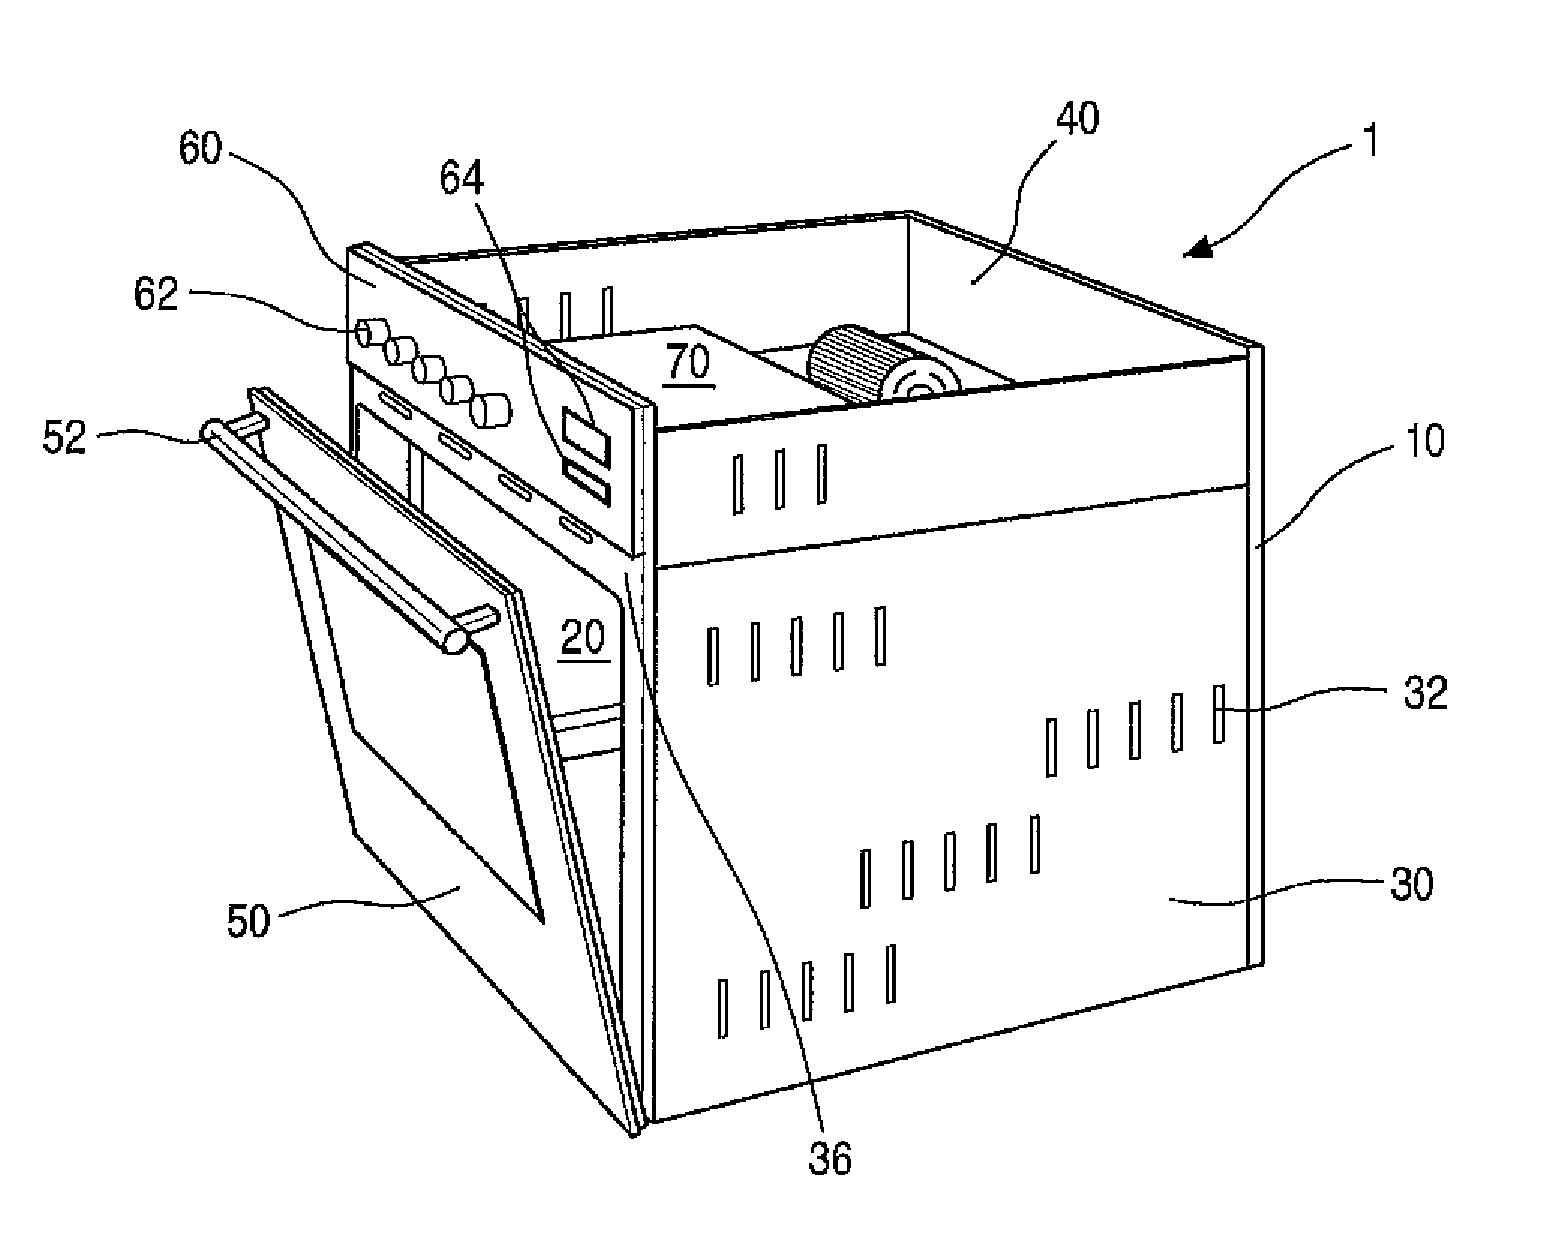 Electric oven with multiple broil heaters and method for preheating the electric oven